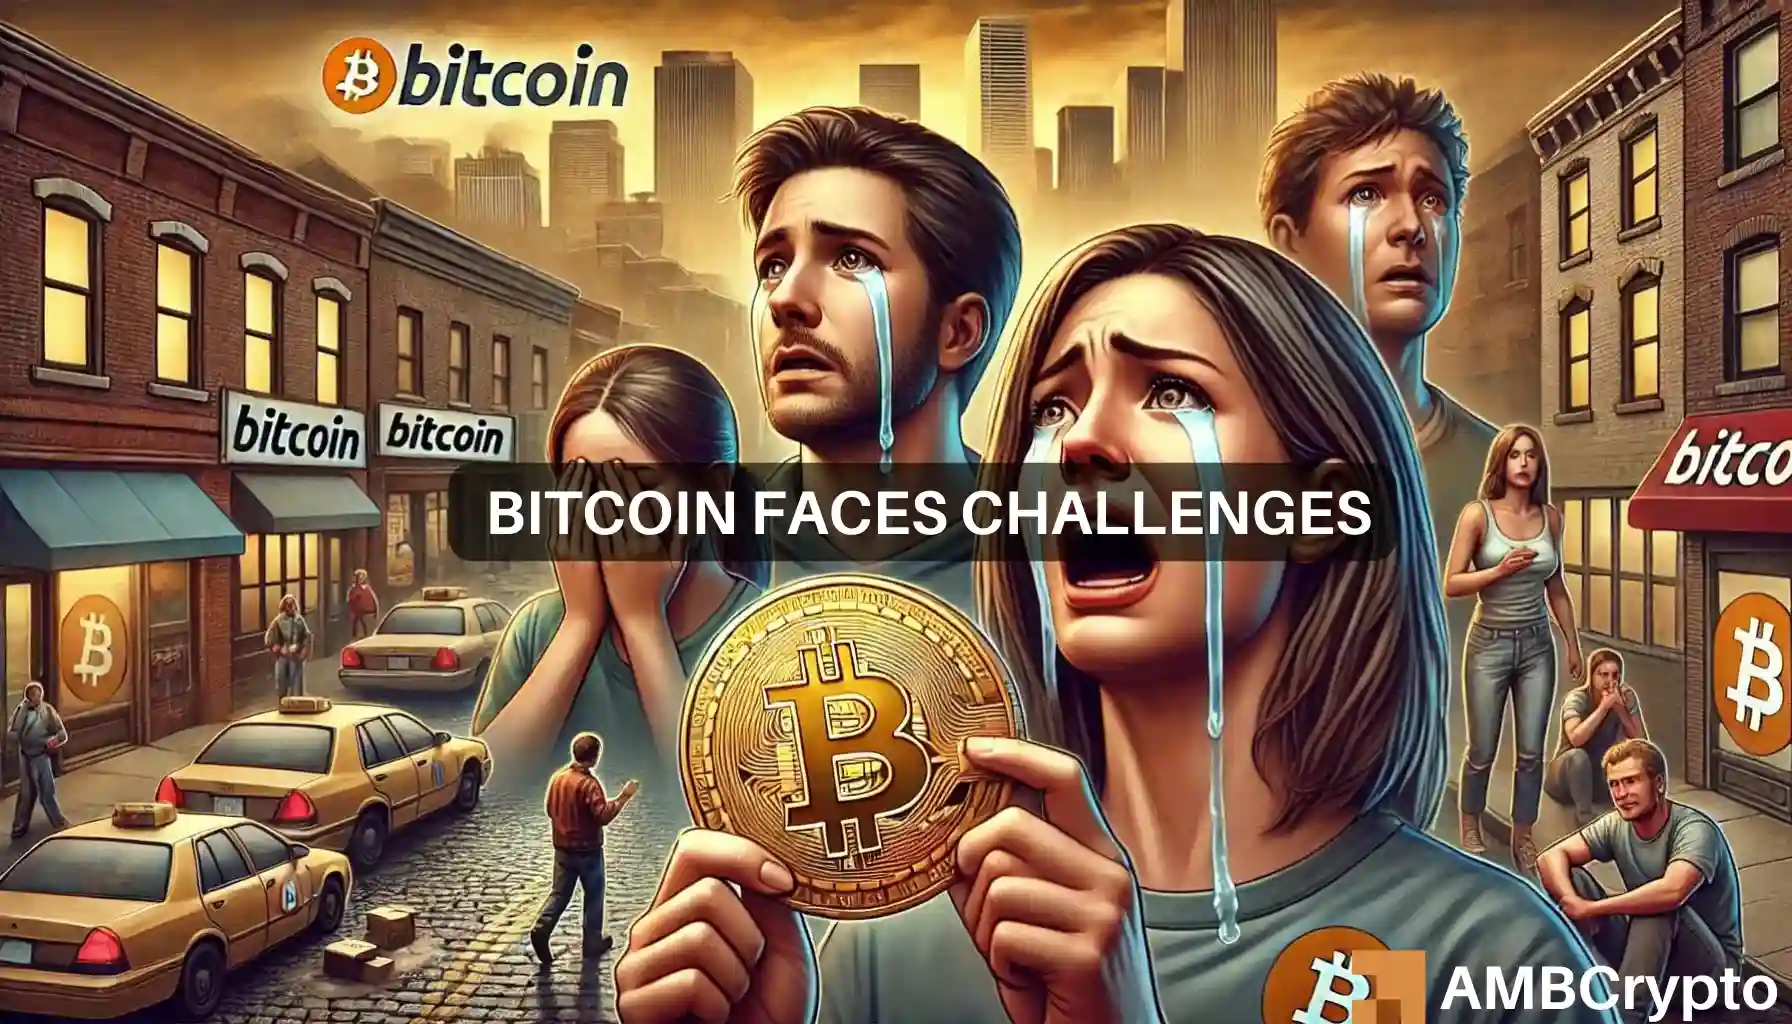 Bitcoin faces challenges